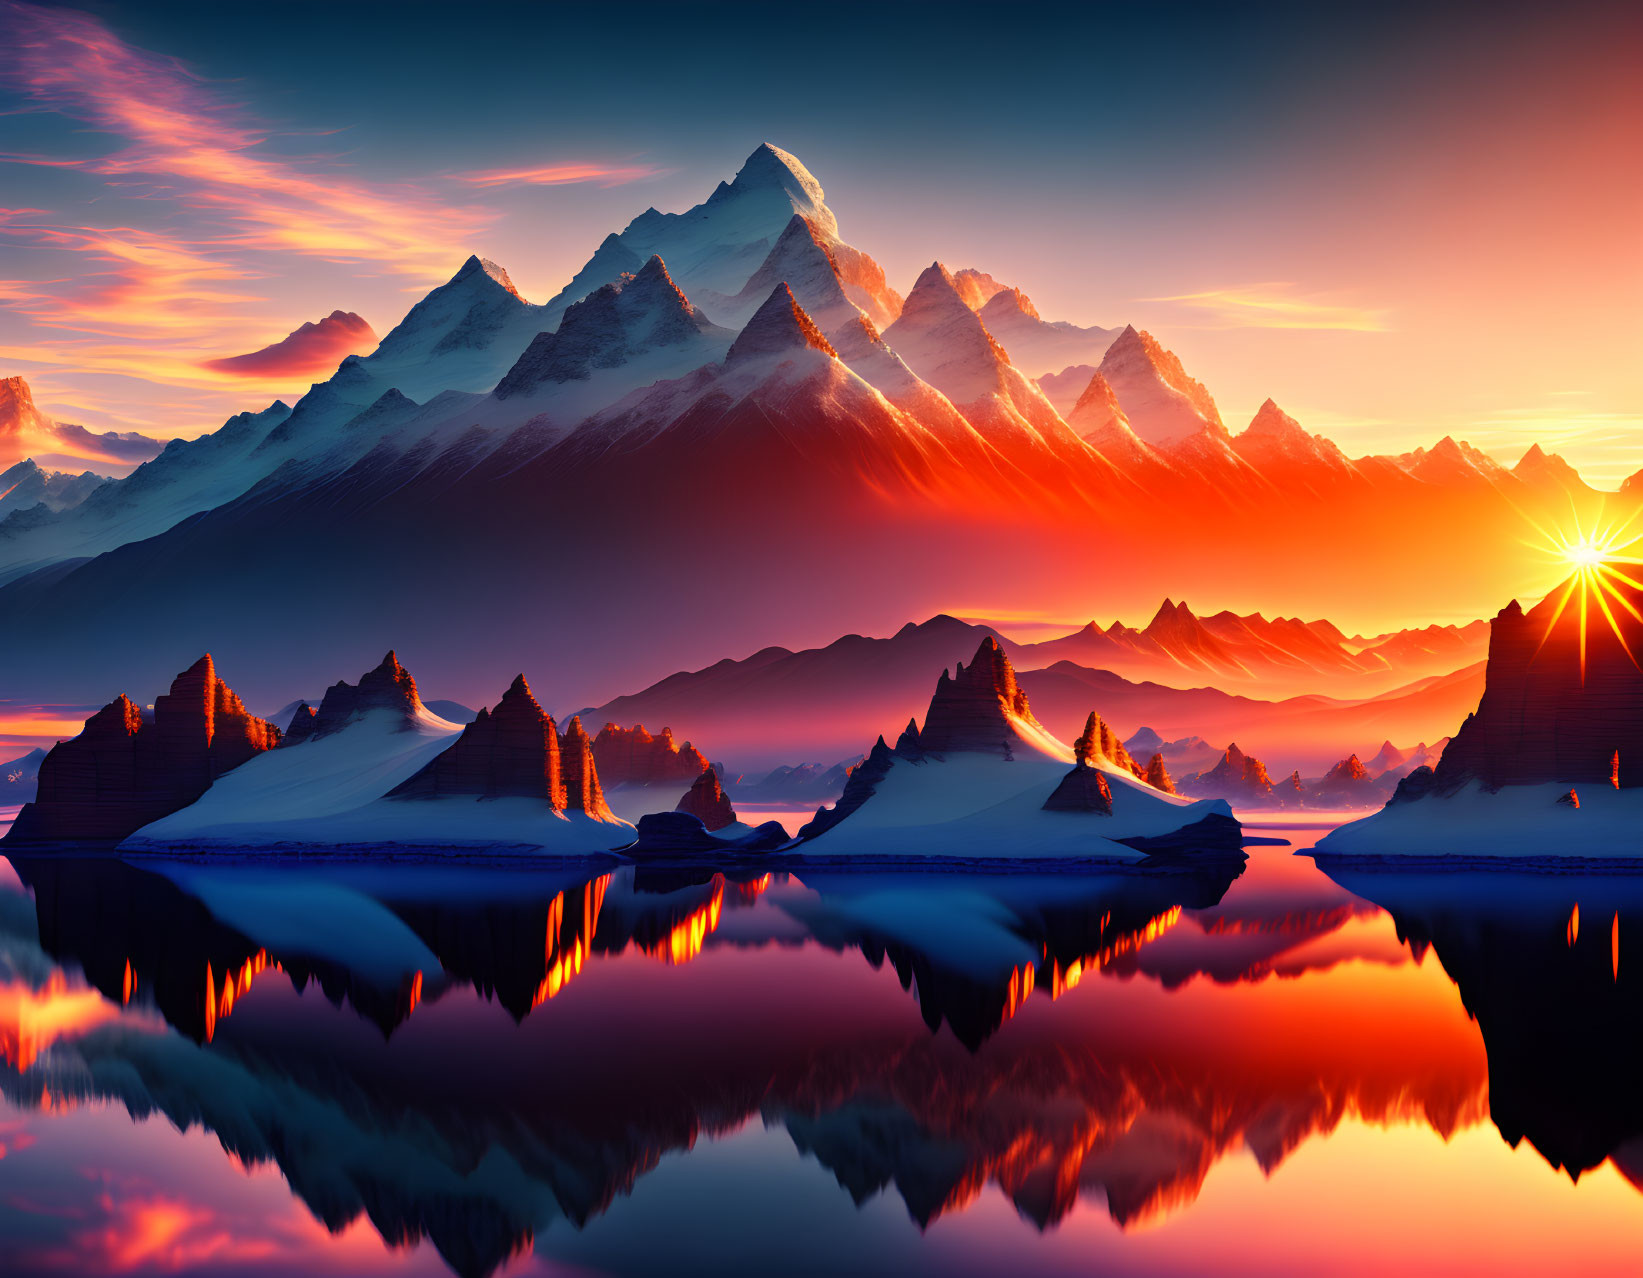 Sunset on a mountains